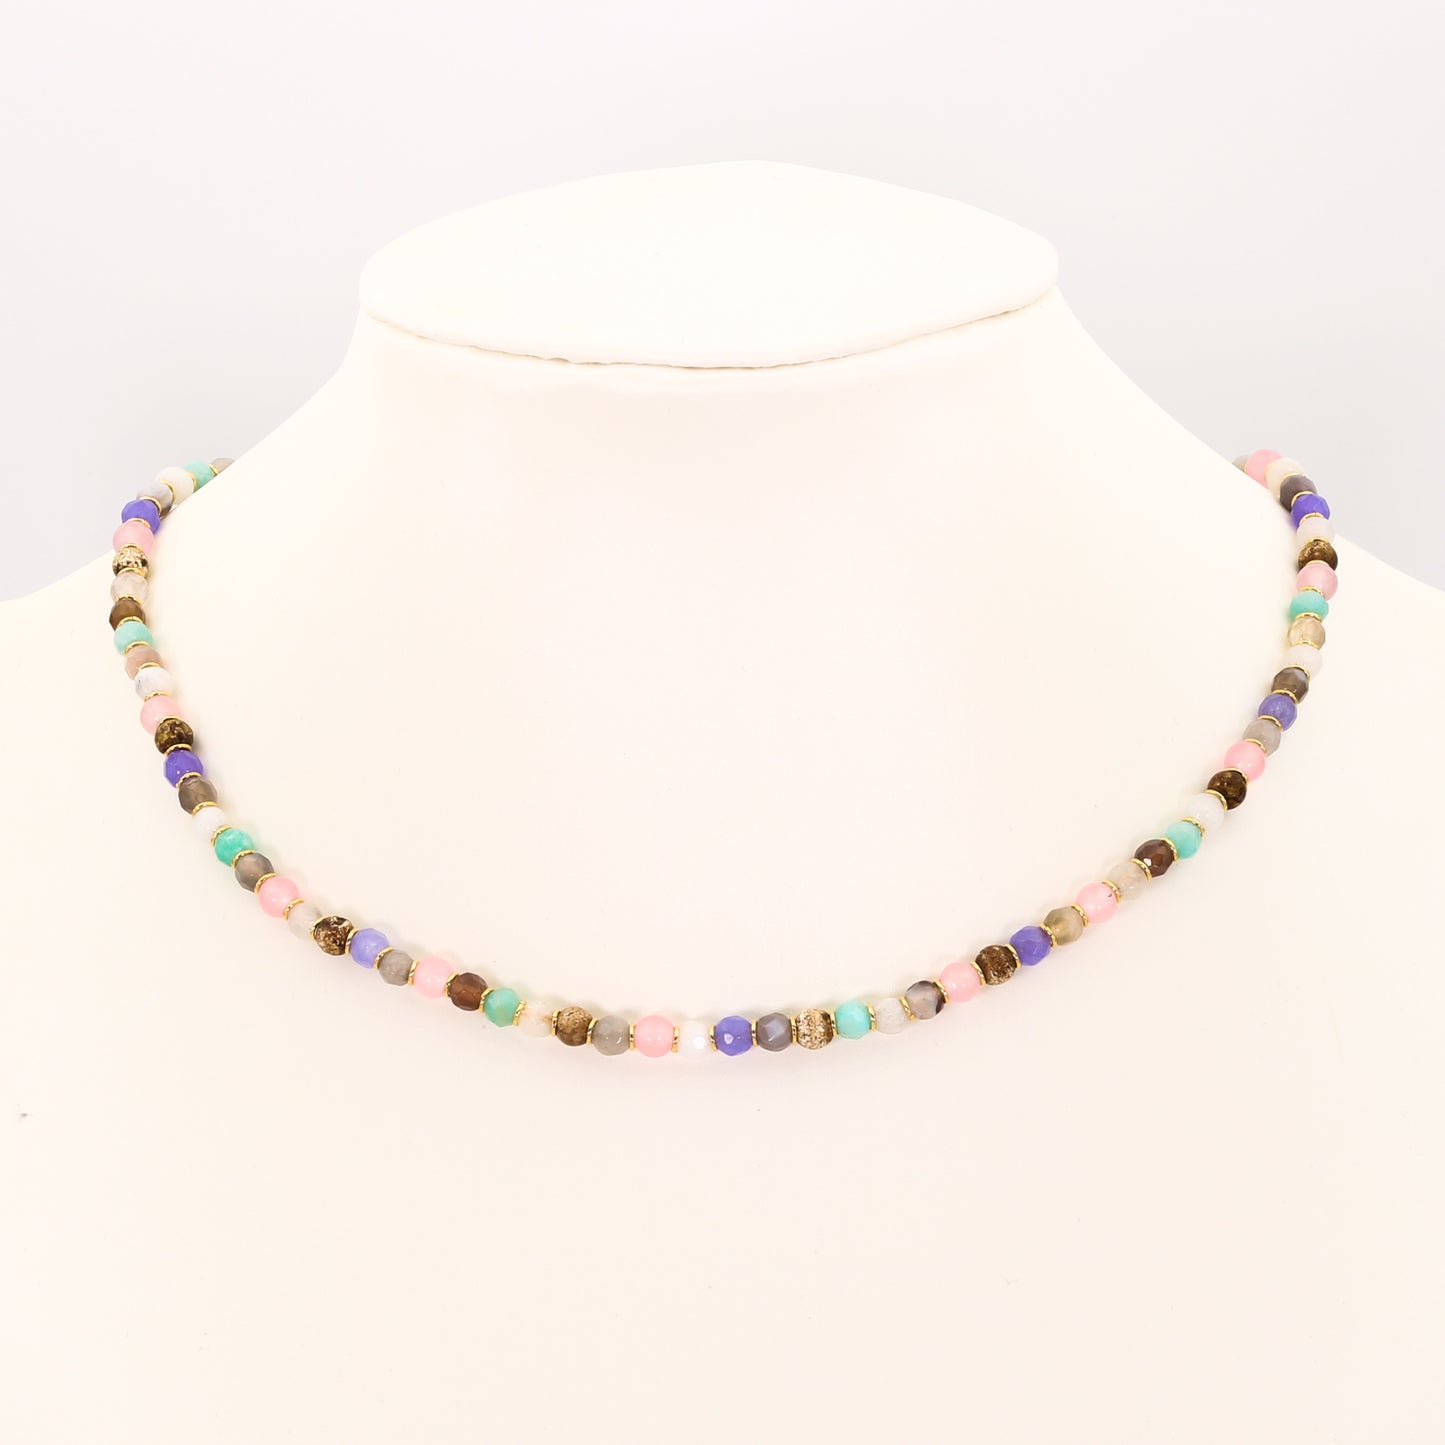 Necklace - "Palette" Choker - CAORLE THE SMALL VENICE Collection